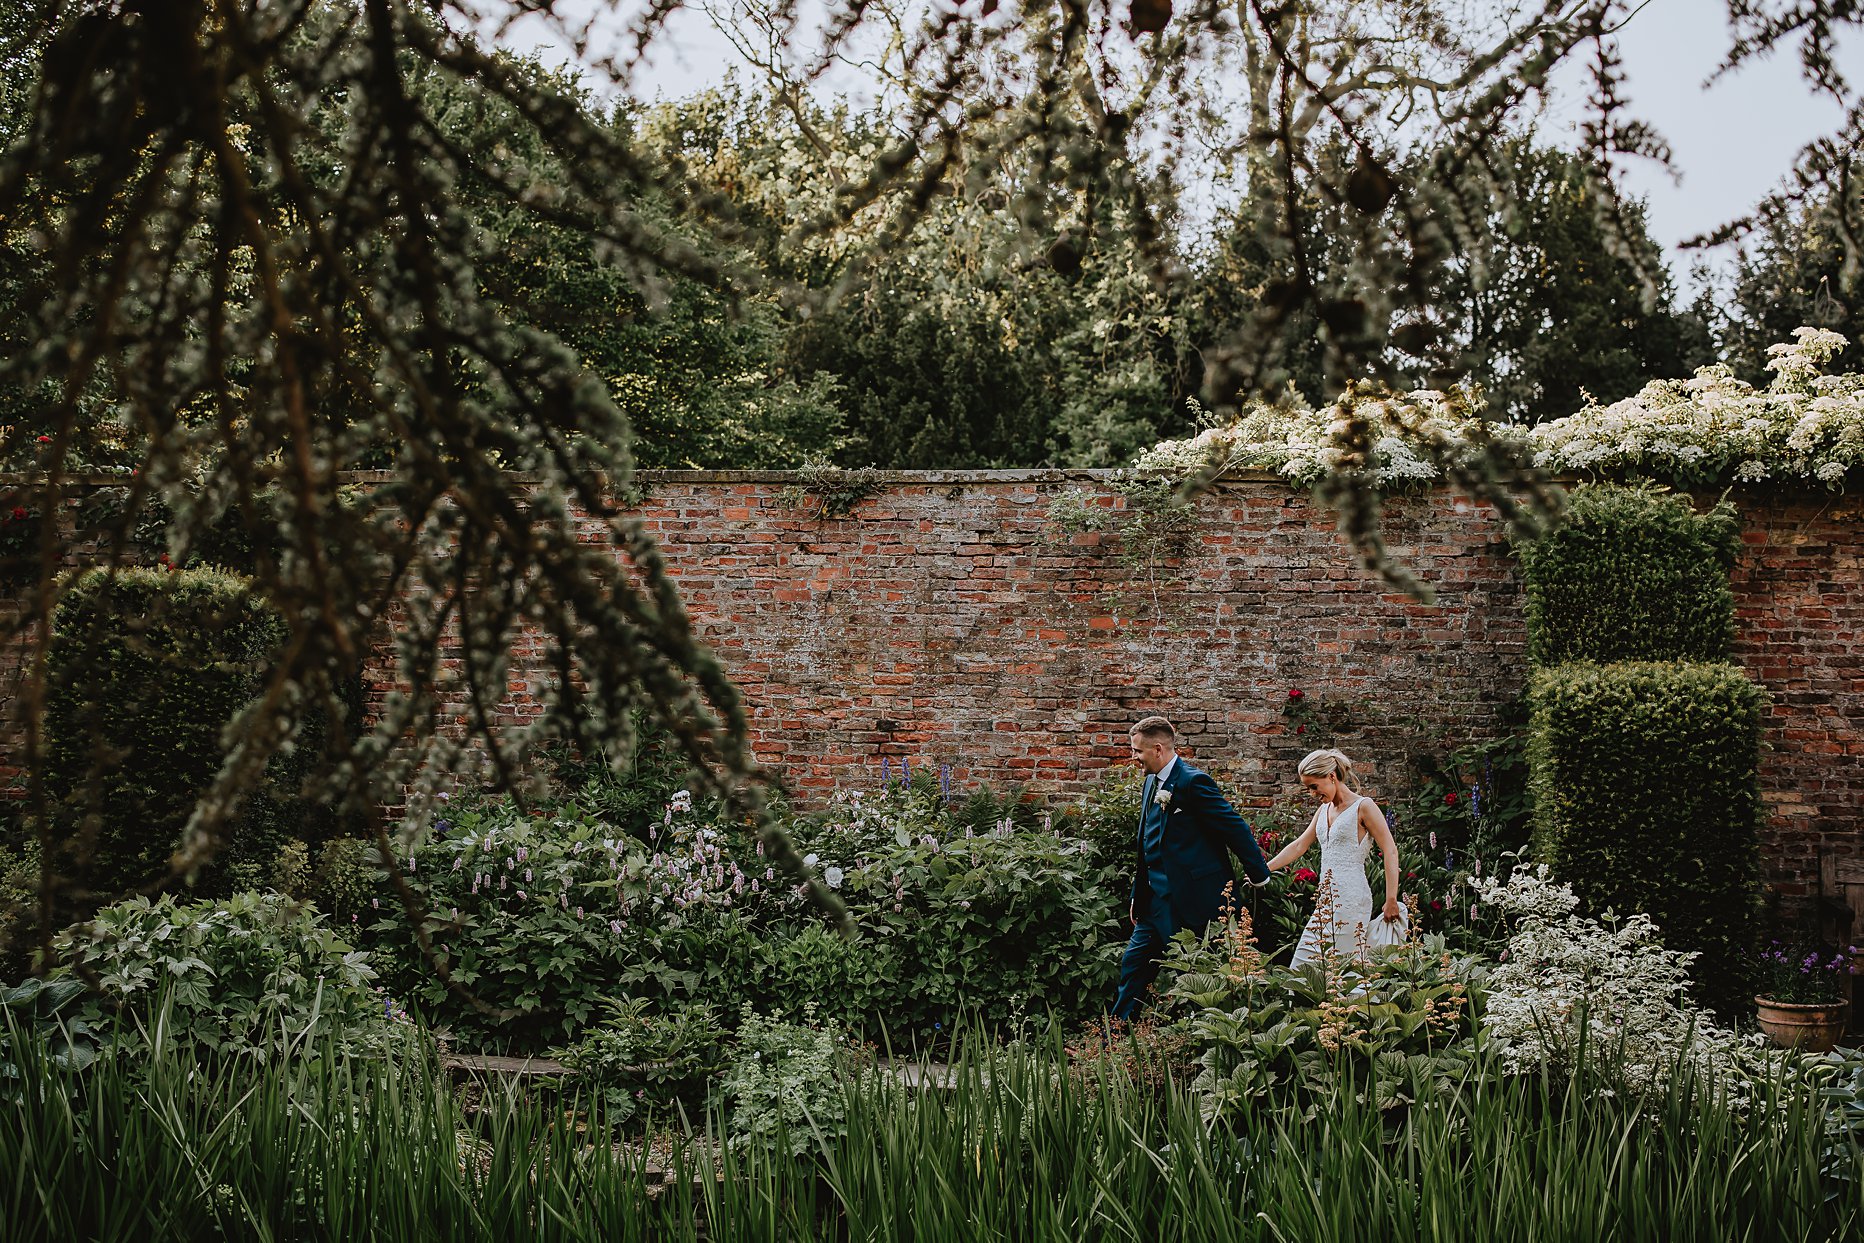 Bride and groom walking hand in hand through the gardens of Saltmarshe Hall. The groom is in front of the bride and leading her. There is a brick wall behind them and they are framed by the foliage and trees in the foreground of the photo.